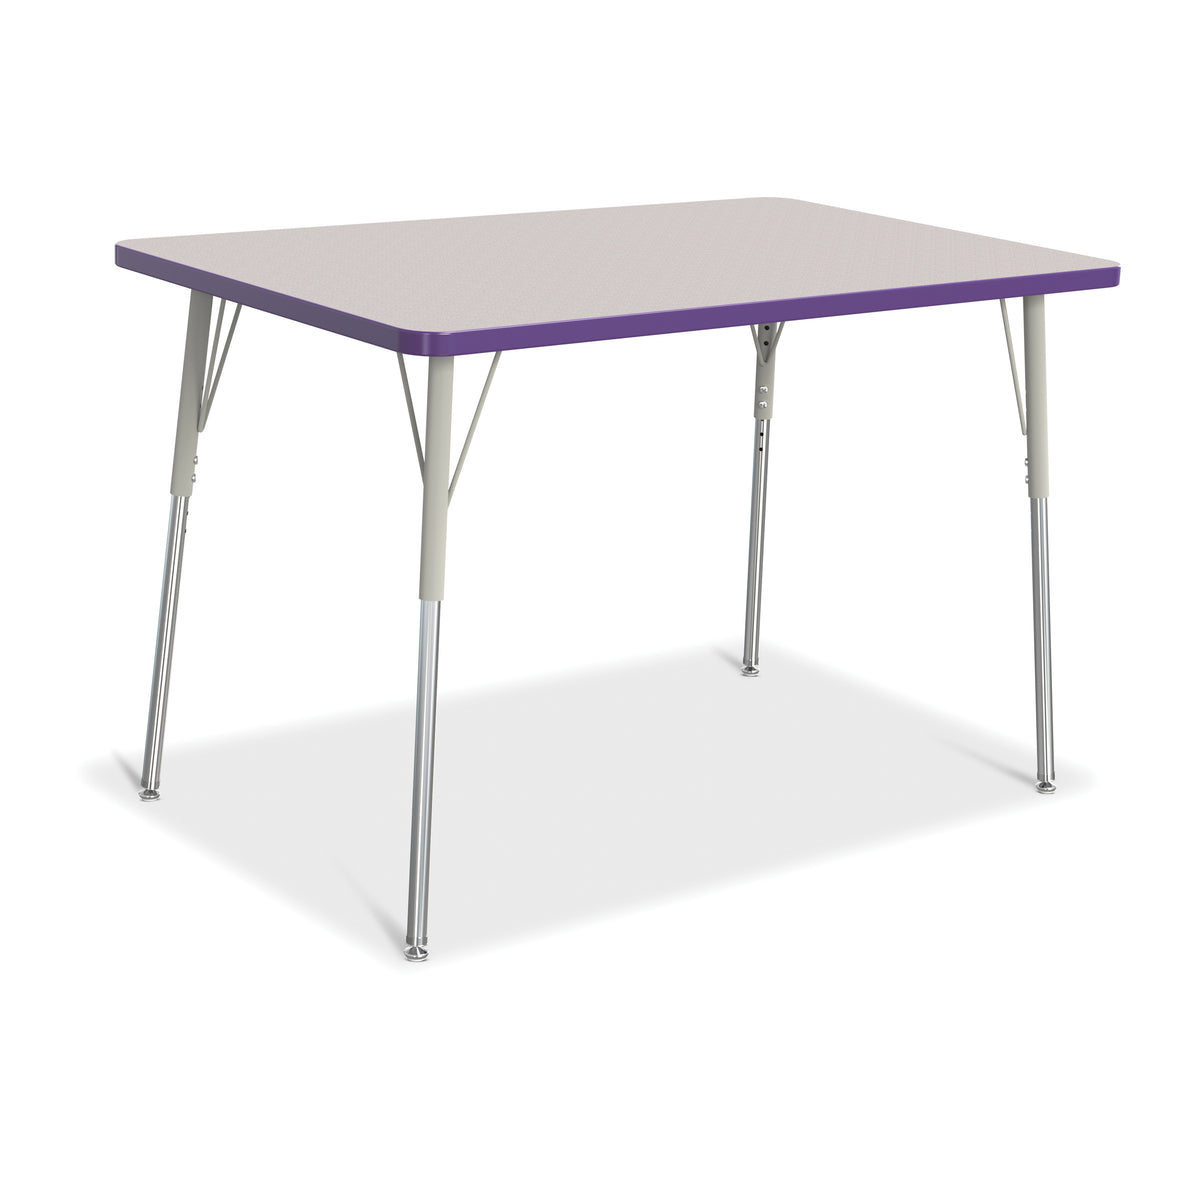 6473JCA004, Berries Rectangle Activity Table - 30" X 48", A-height - Freckled Gray/Purple/Gray